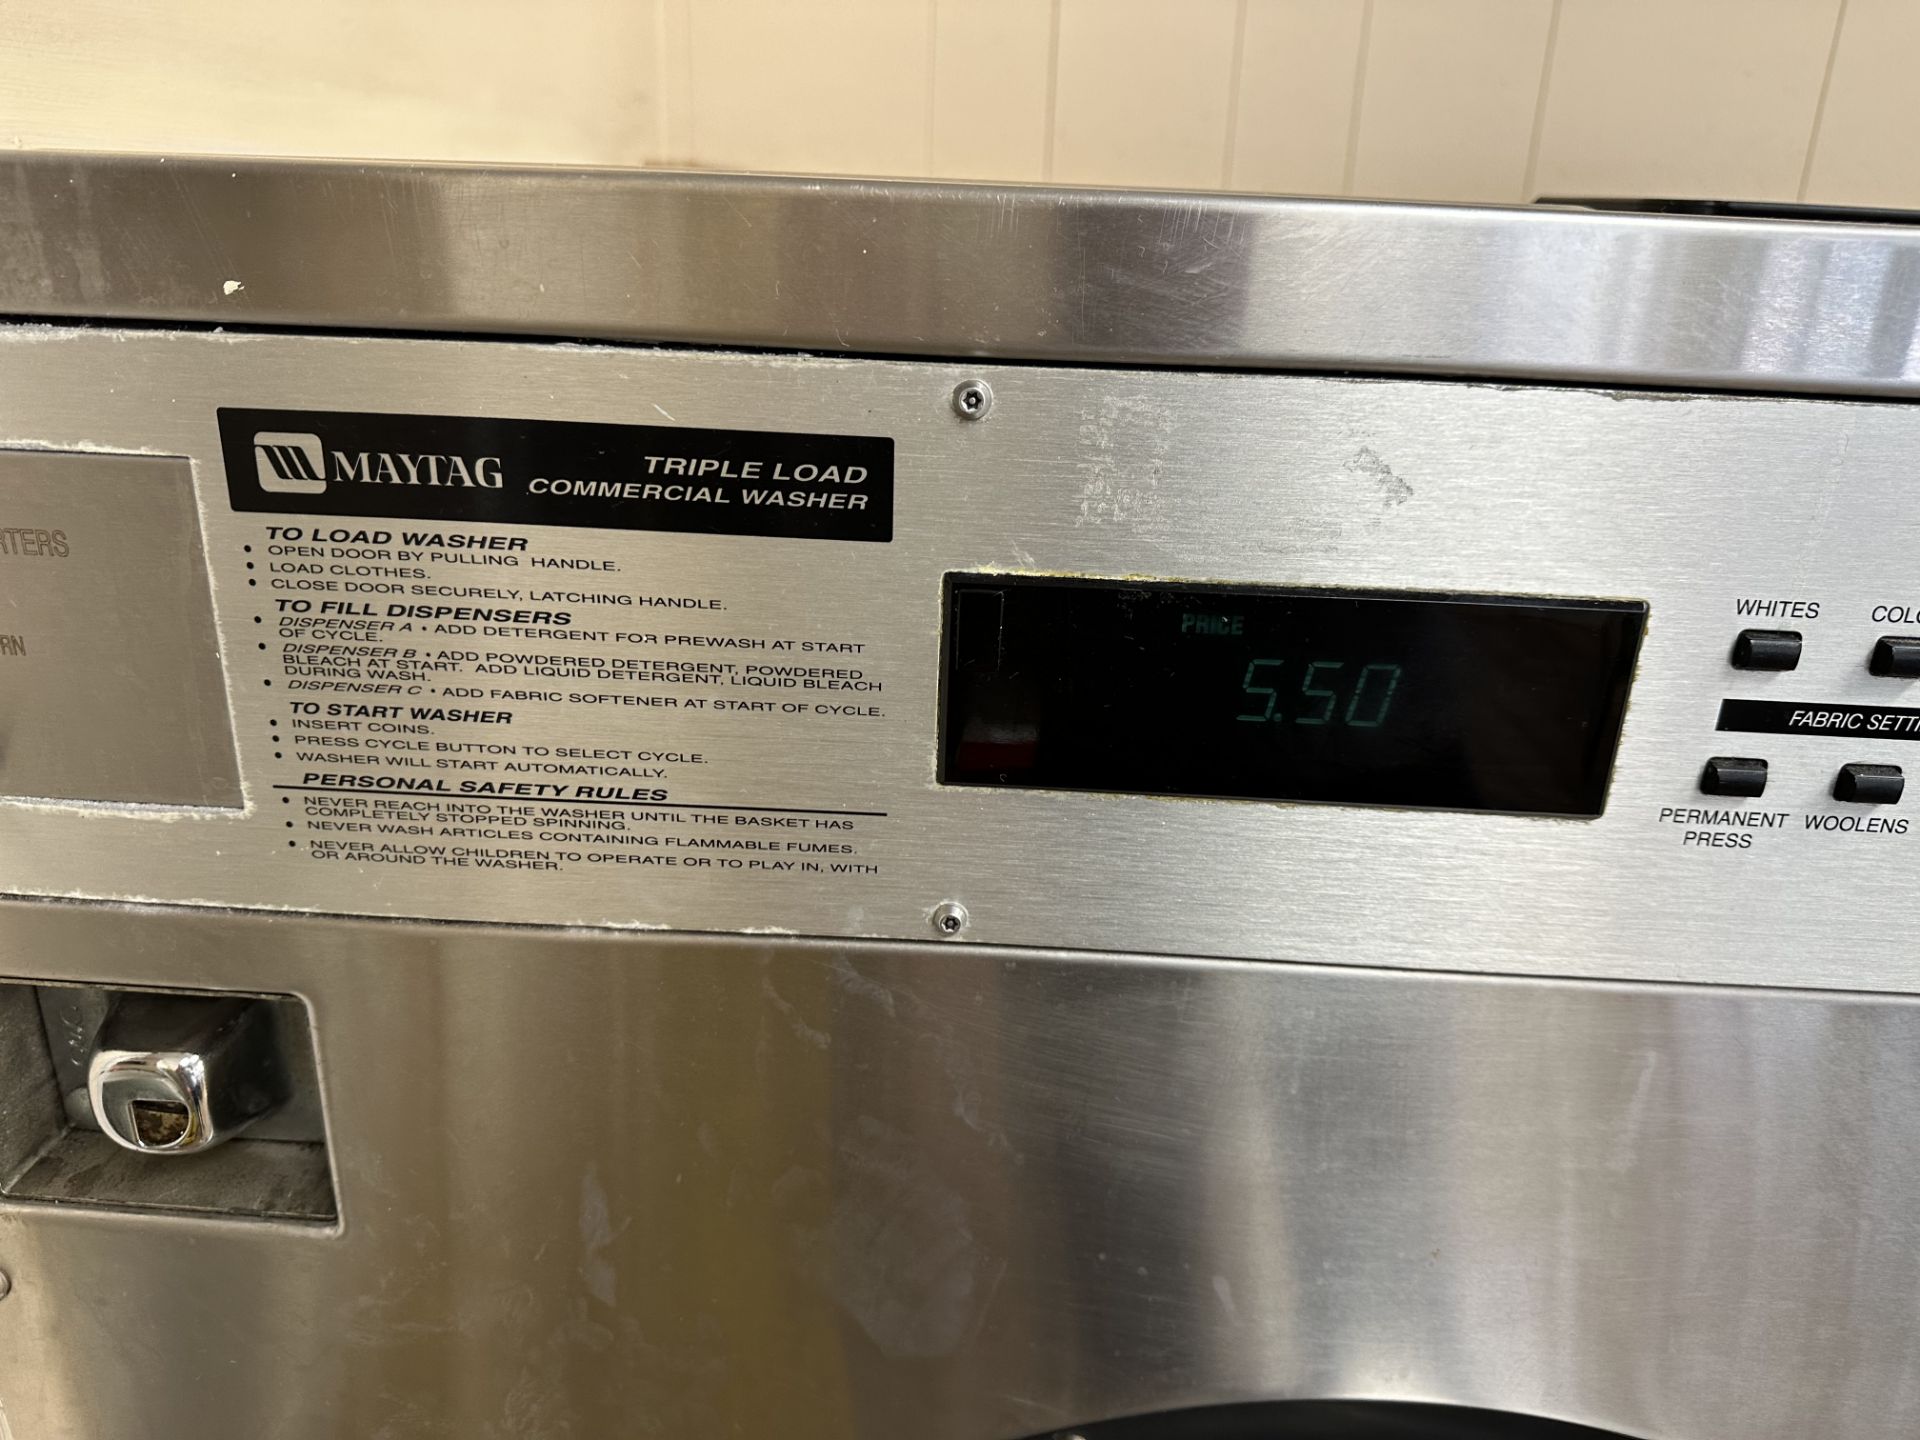 Maytag #MFR35PDATS Triple Load Commercial Washing Machine, 35 Lb. Load Capacity & Coin Operated, - Image 2 of 4